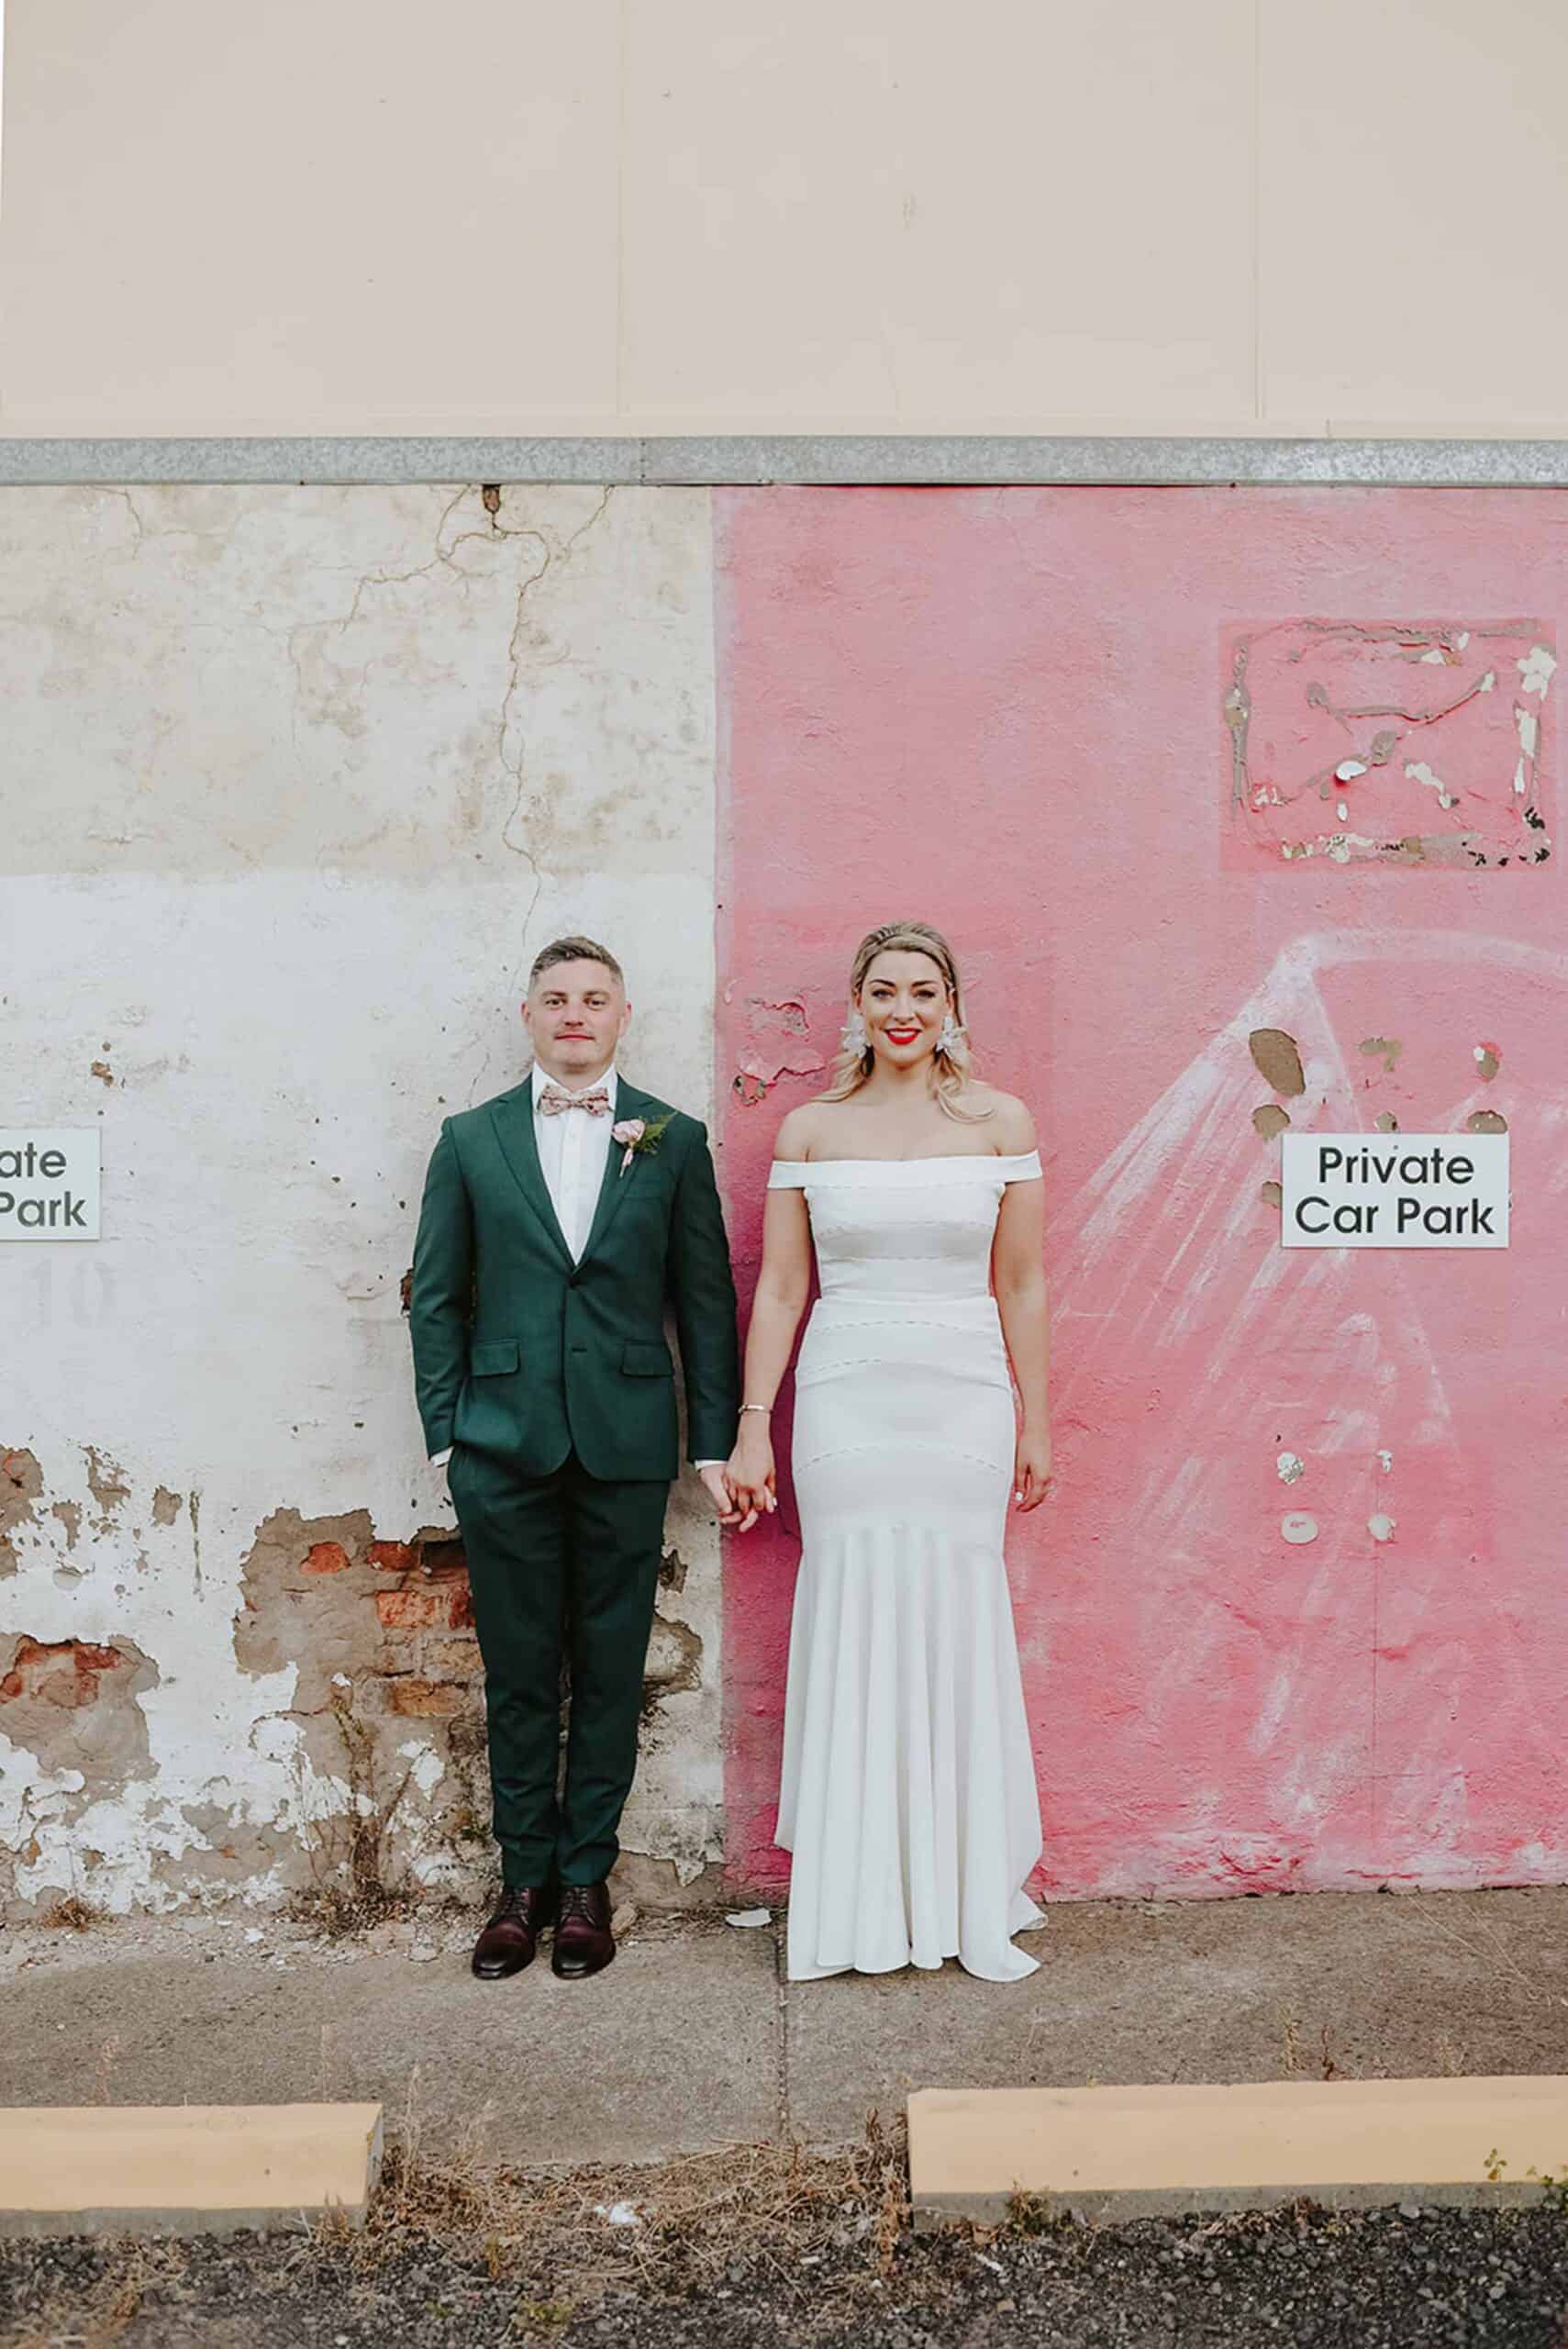 fun and colourful wedding at The Warehouse Geelong